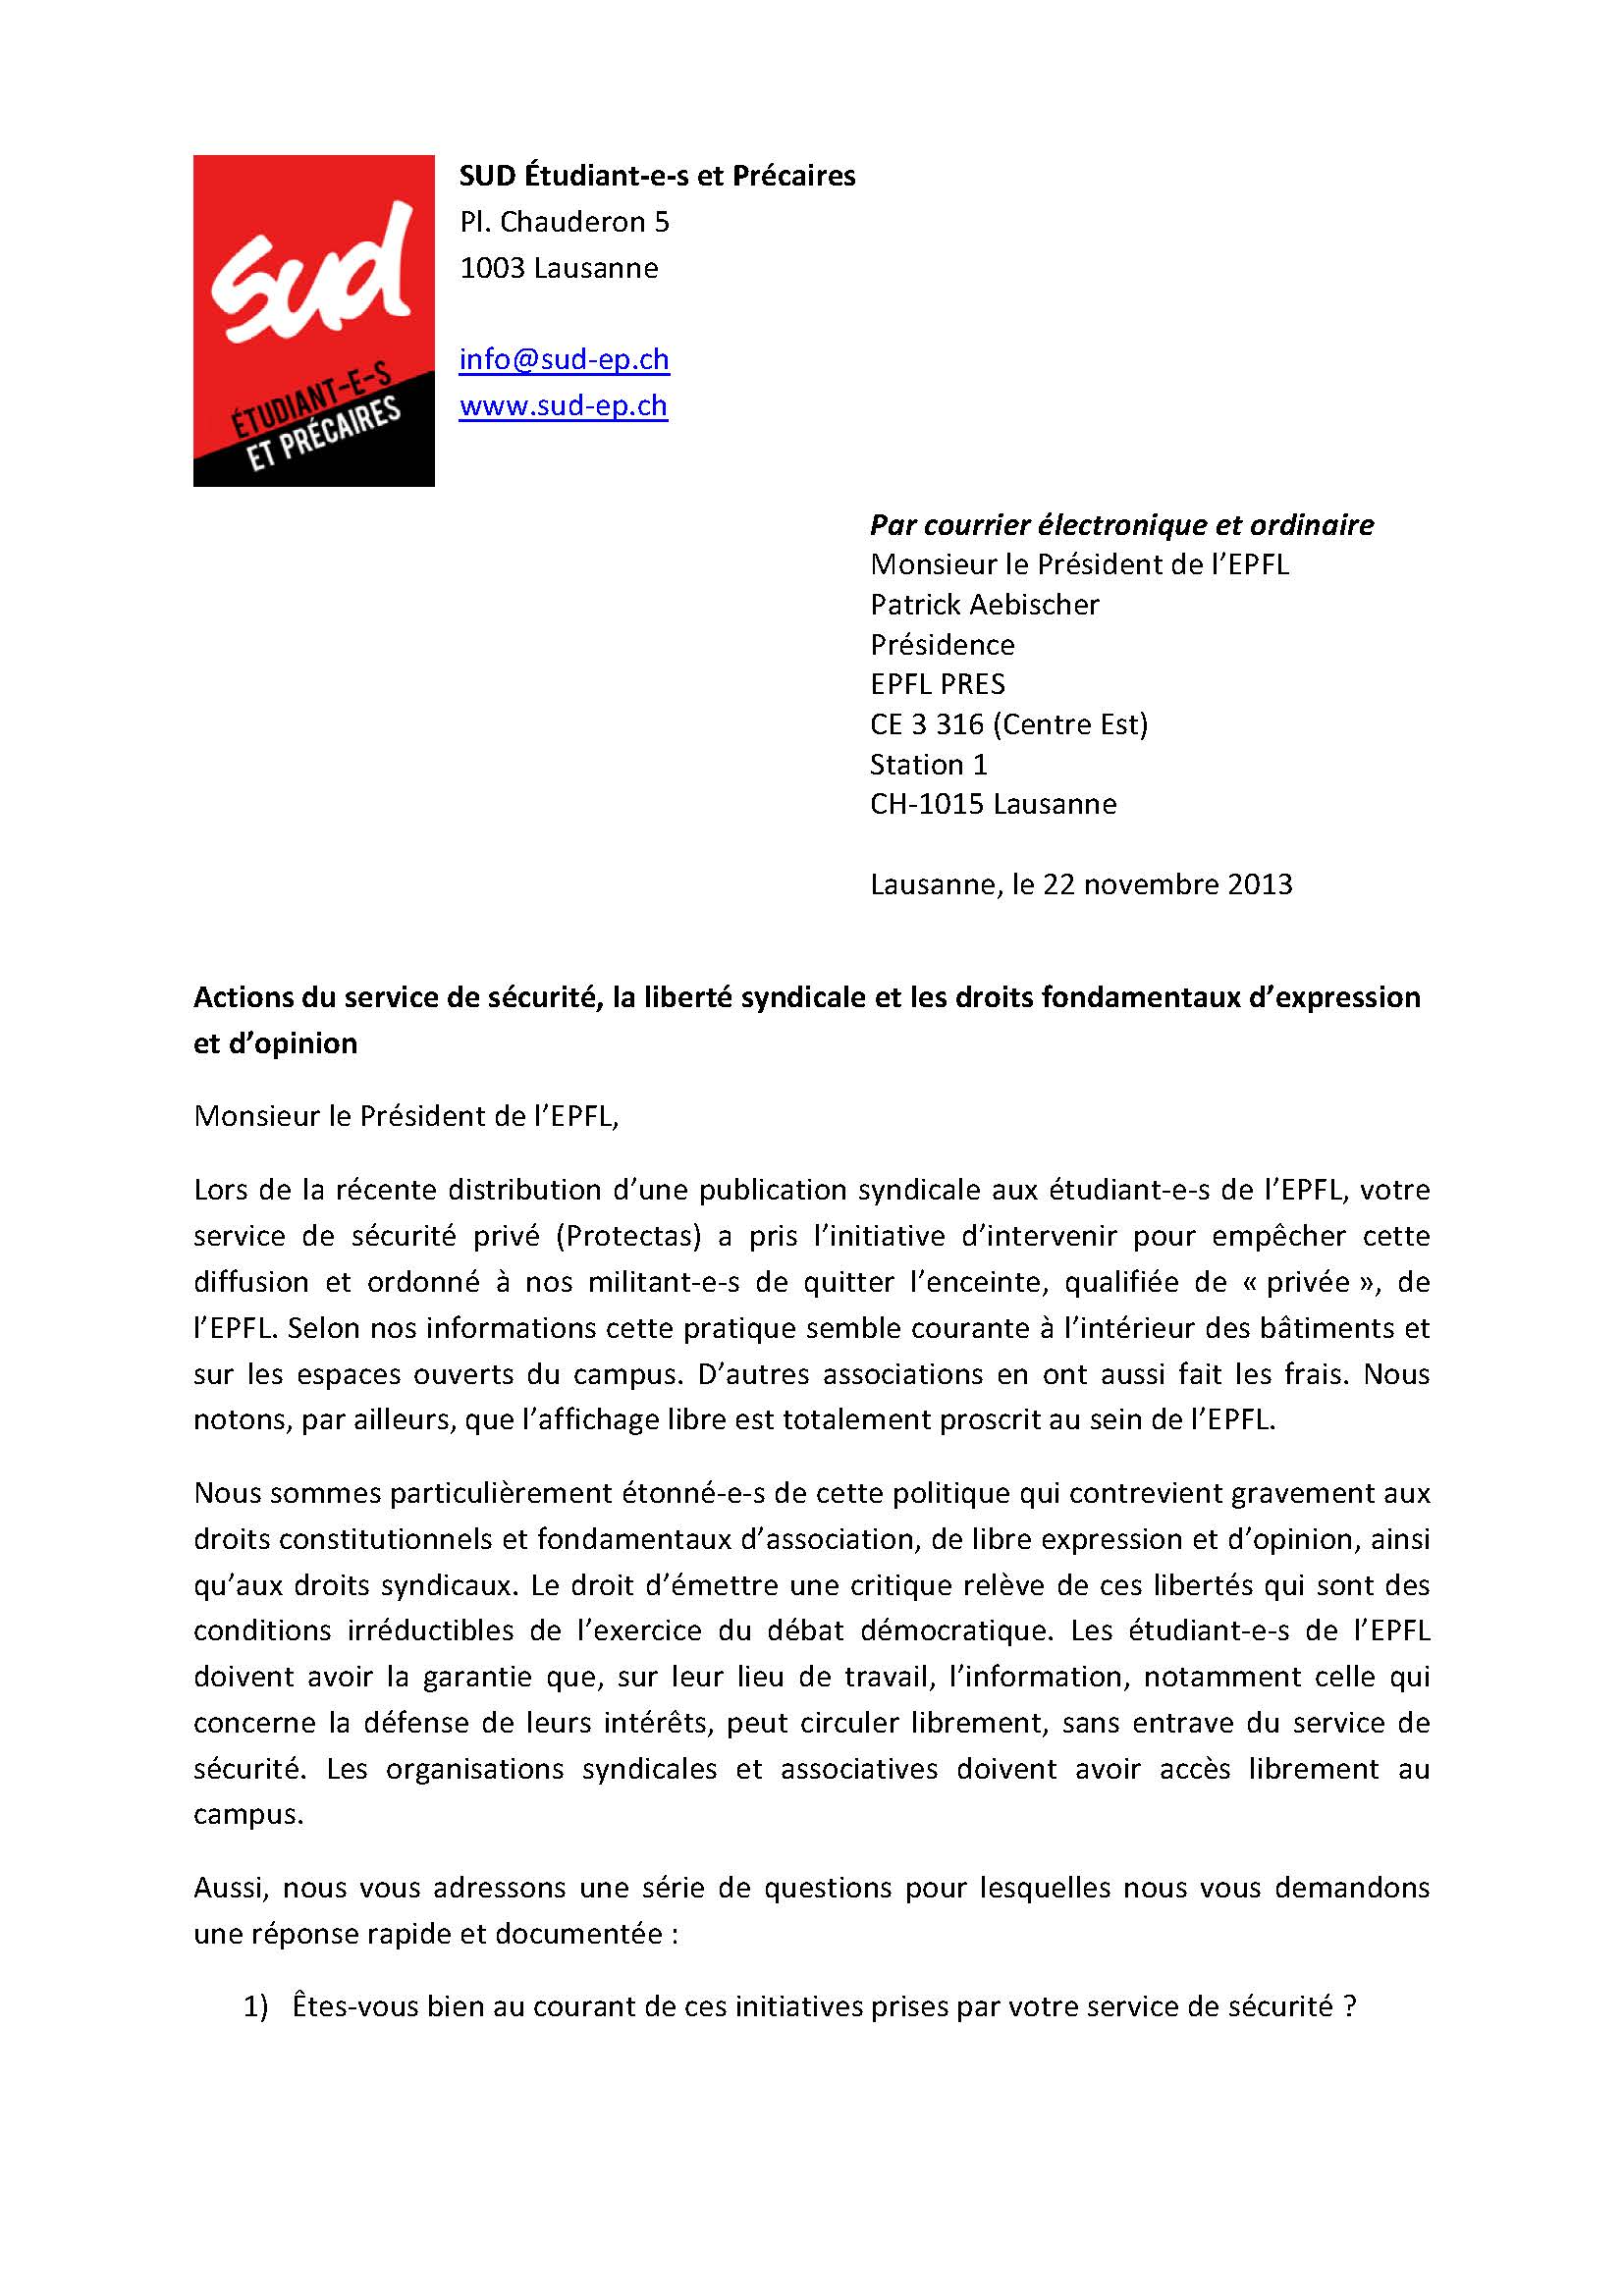 securite_Page_1